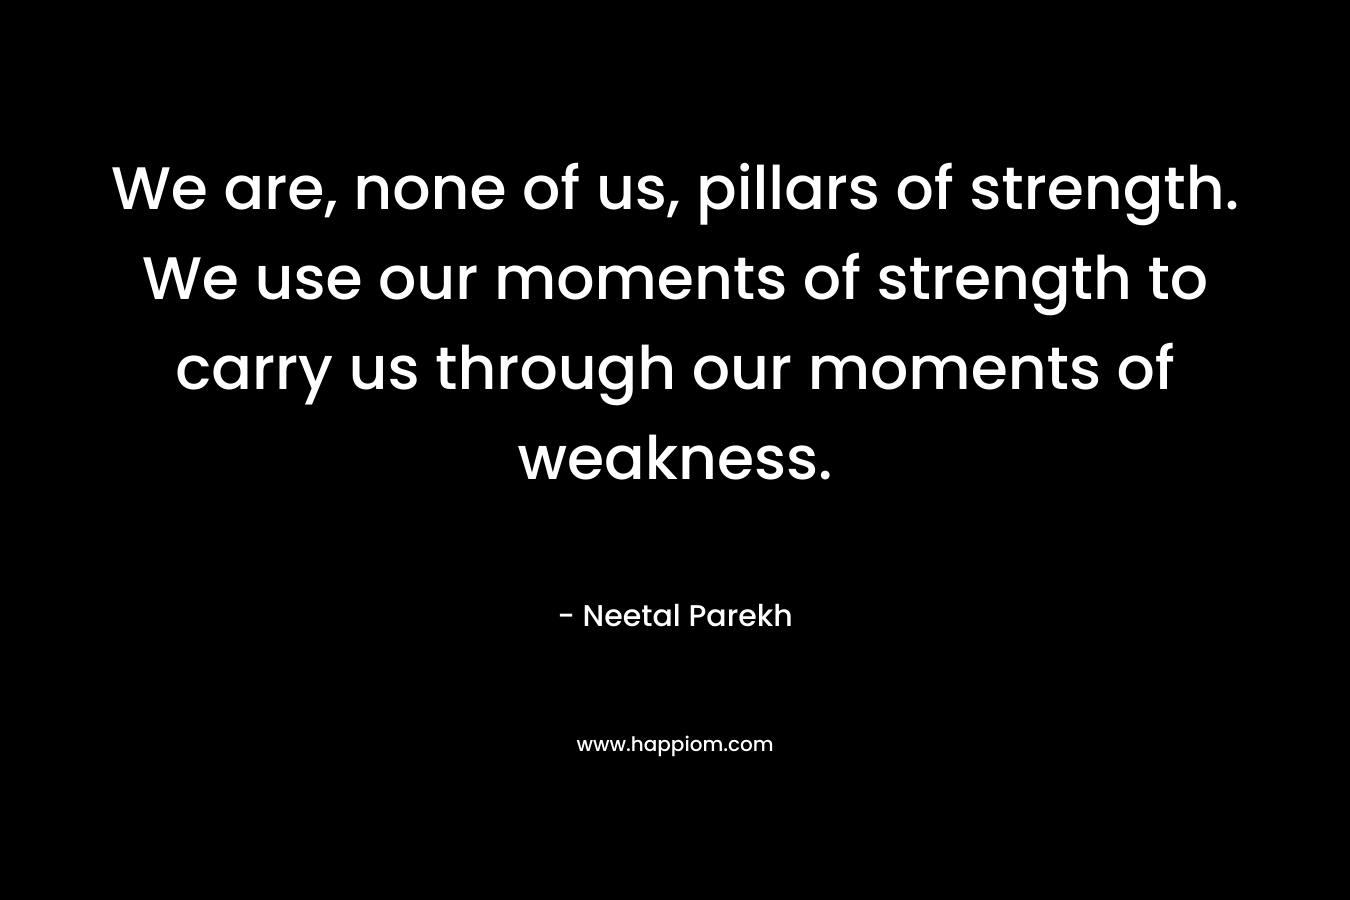 We are, none of us, pillars of strength. We use our moments of strength to carry us through our moments of weakness.